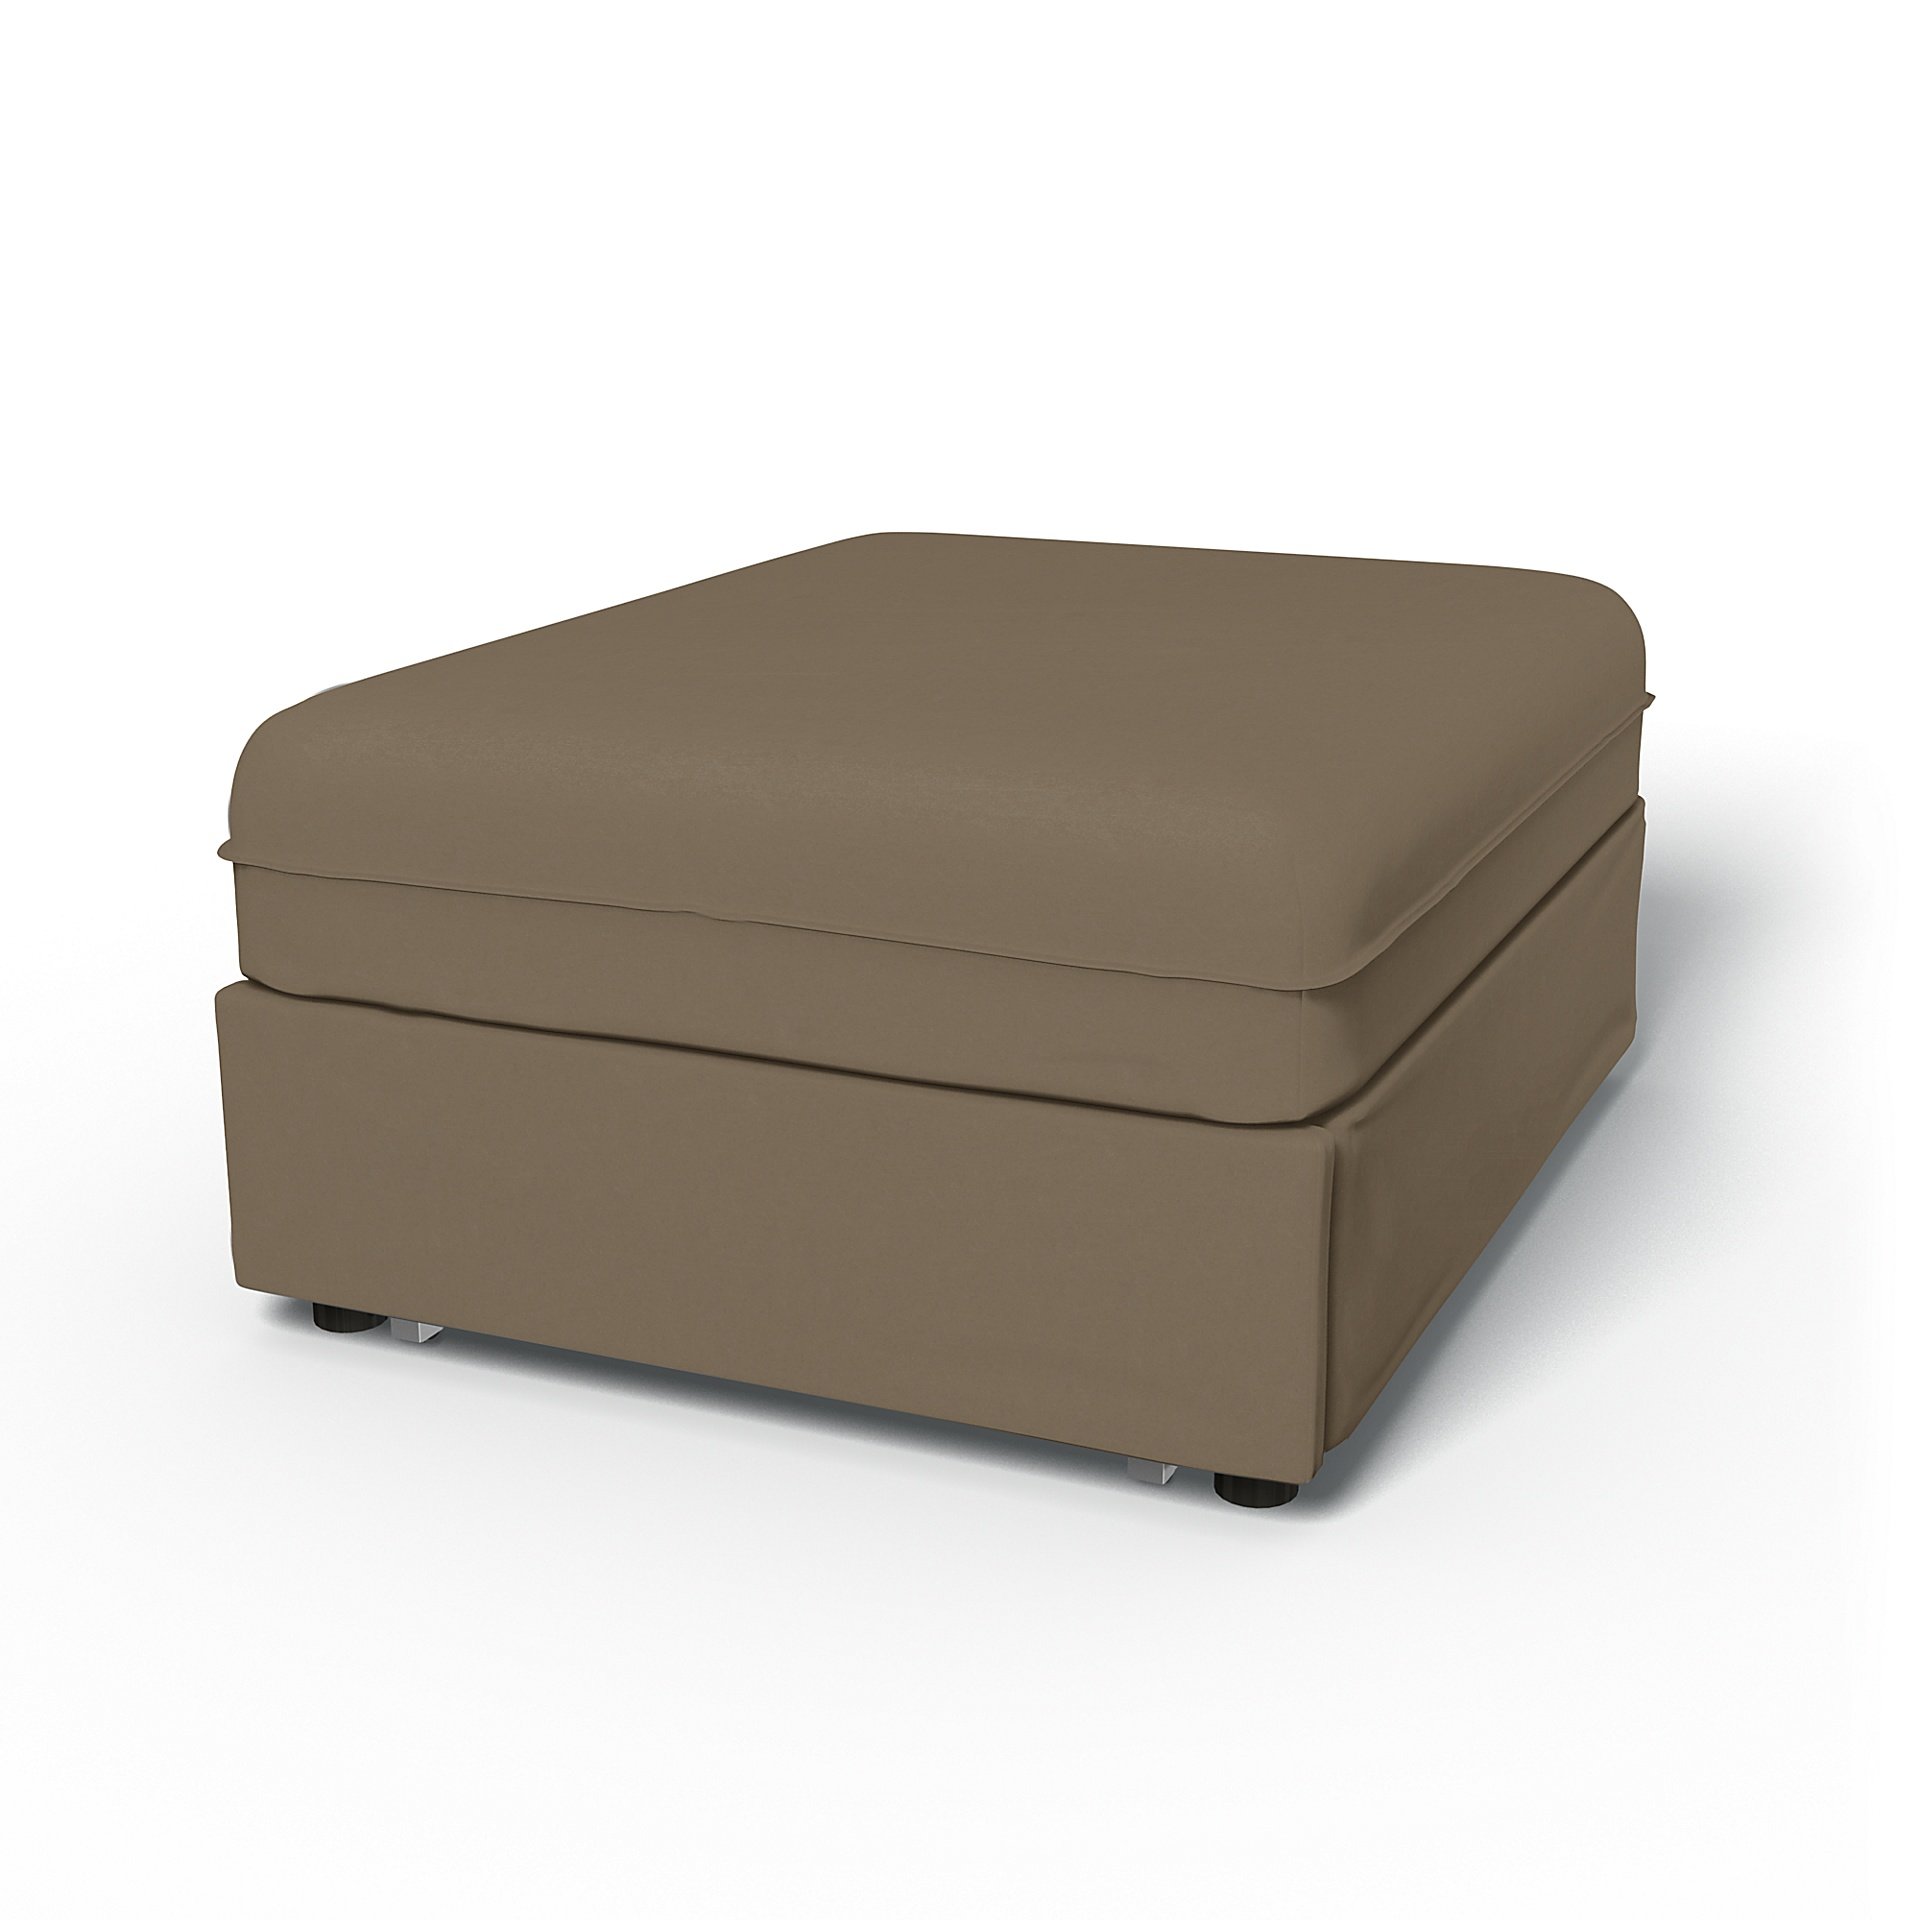 IKEA - Vallentuna Seat Module with Sofa Bed Cover 80x100cm 32x39in, Taupe, Velvet - Bemz